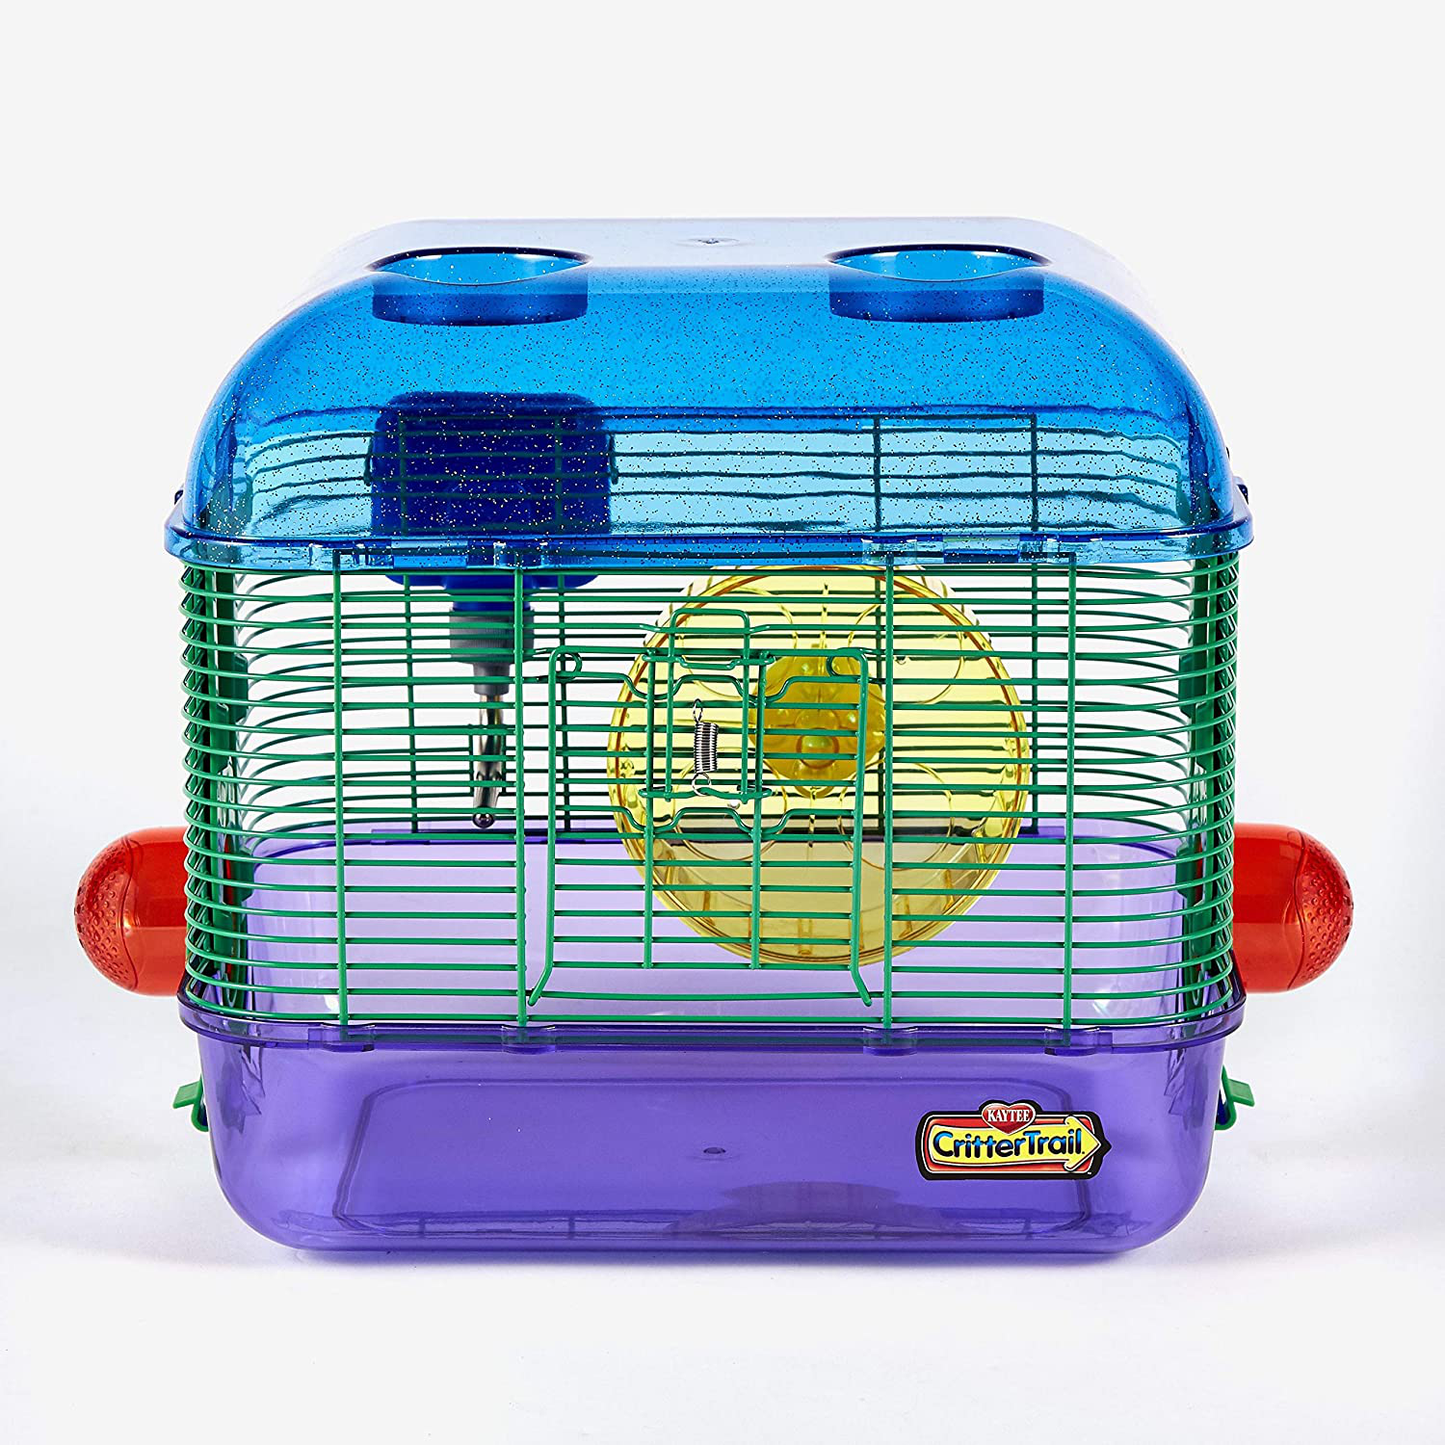 Kaytee Critter Trail Begin and Connect Habitat for Hamsters,Multicolor,Small